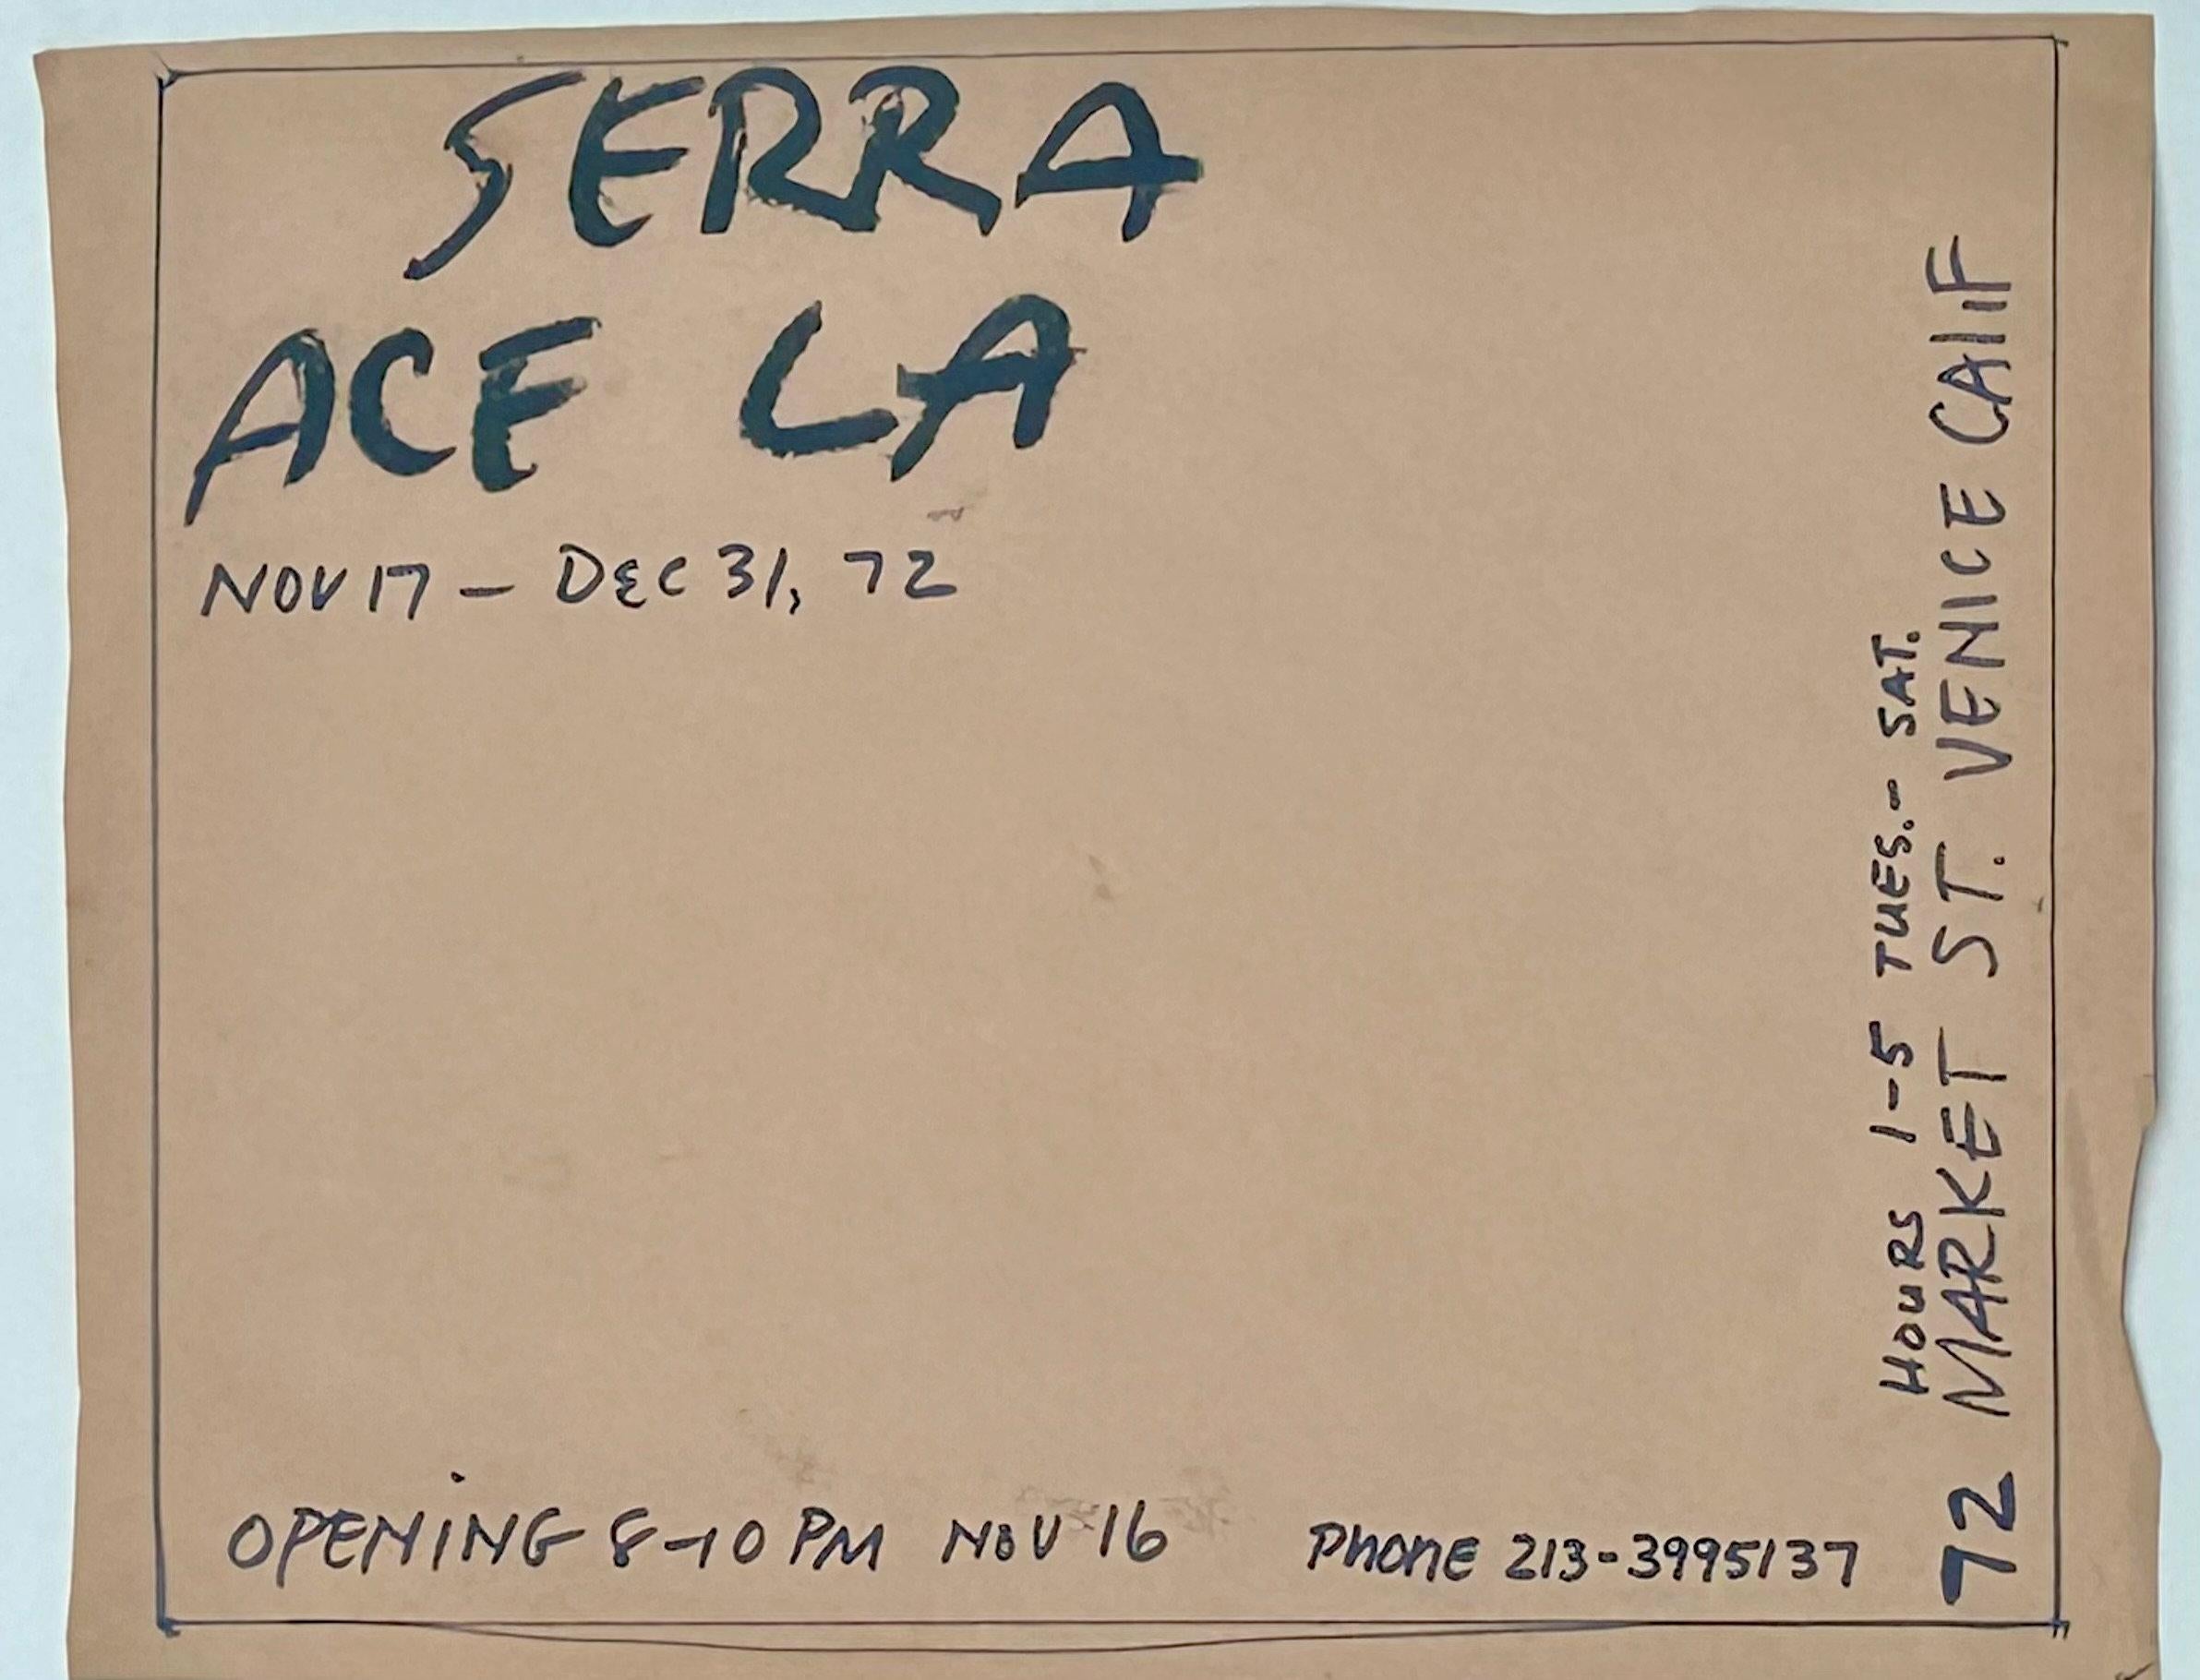 Richard Serra
Ace LA Exhibition Poster Drawing, 1972
Ink on paper
8 1/2 x 11 inches

Provenance:
The artist
Ace Gallery, Los Angeles

Known for large-scale steel sculpture of geometric designs, Richard Serra has created site-specific pieces that